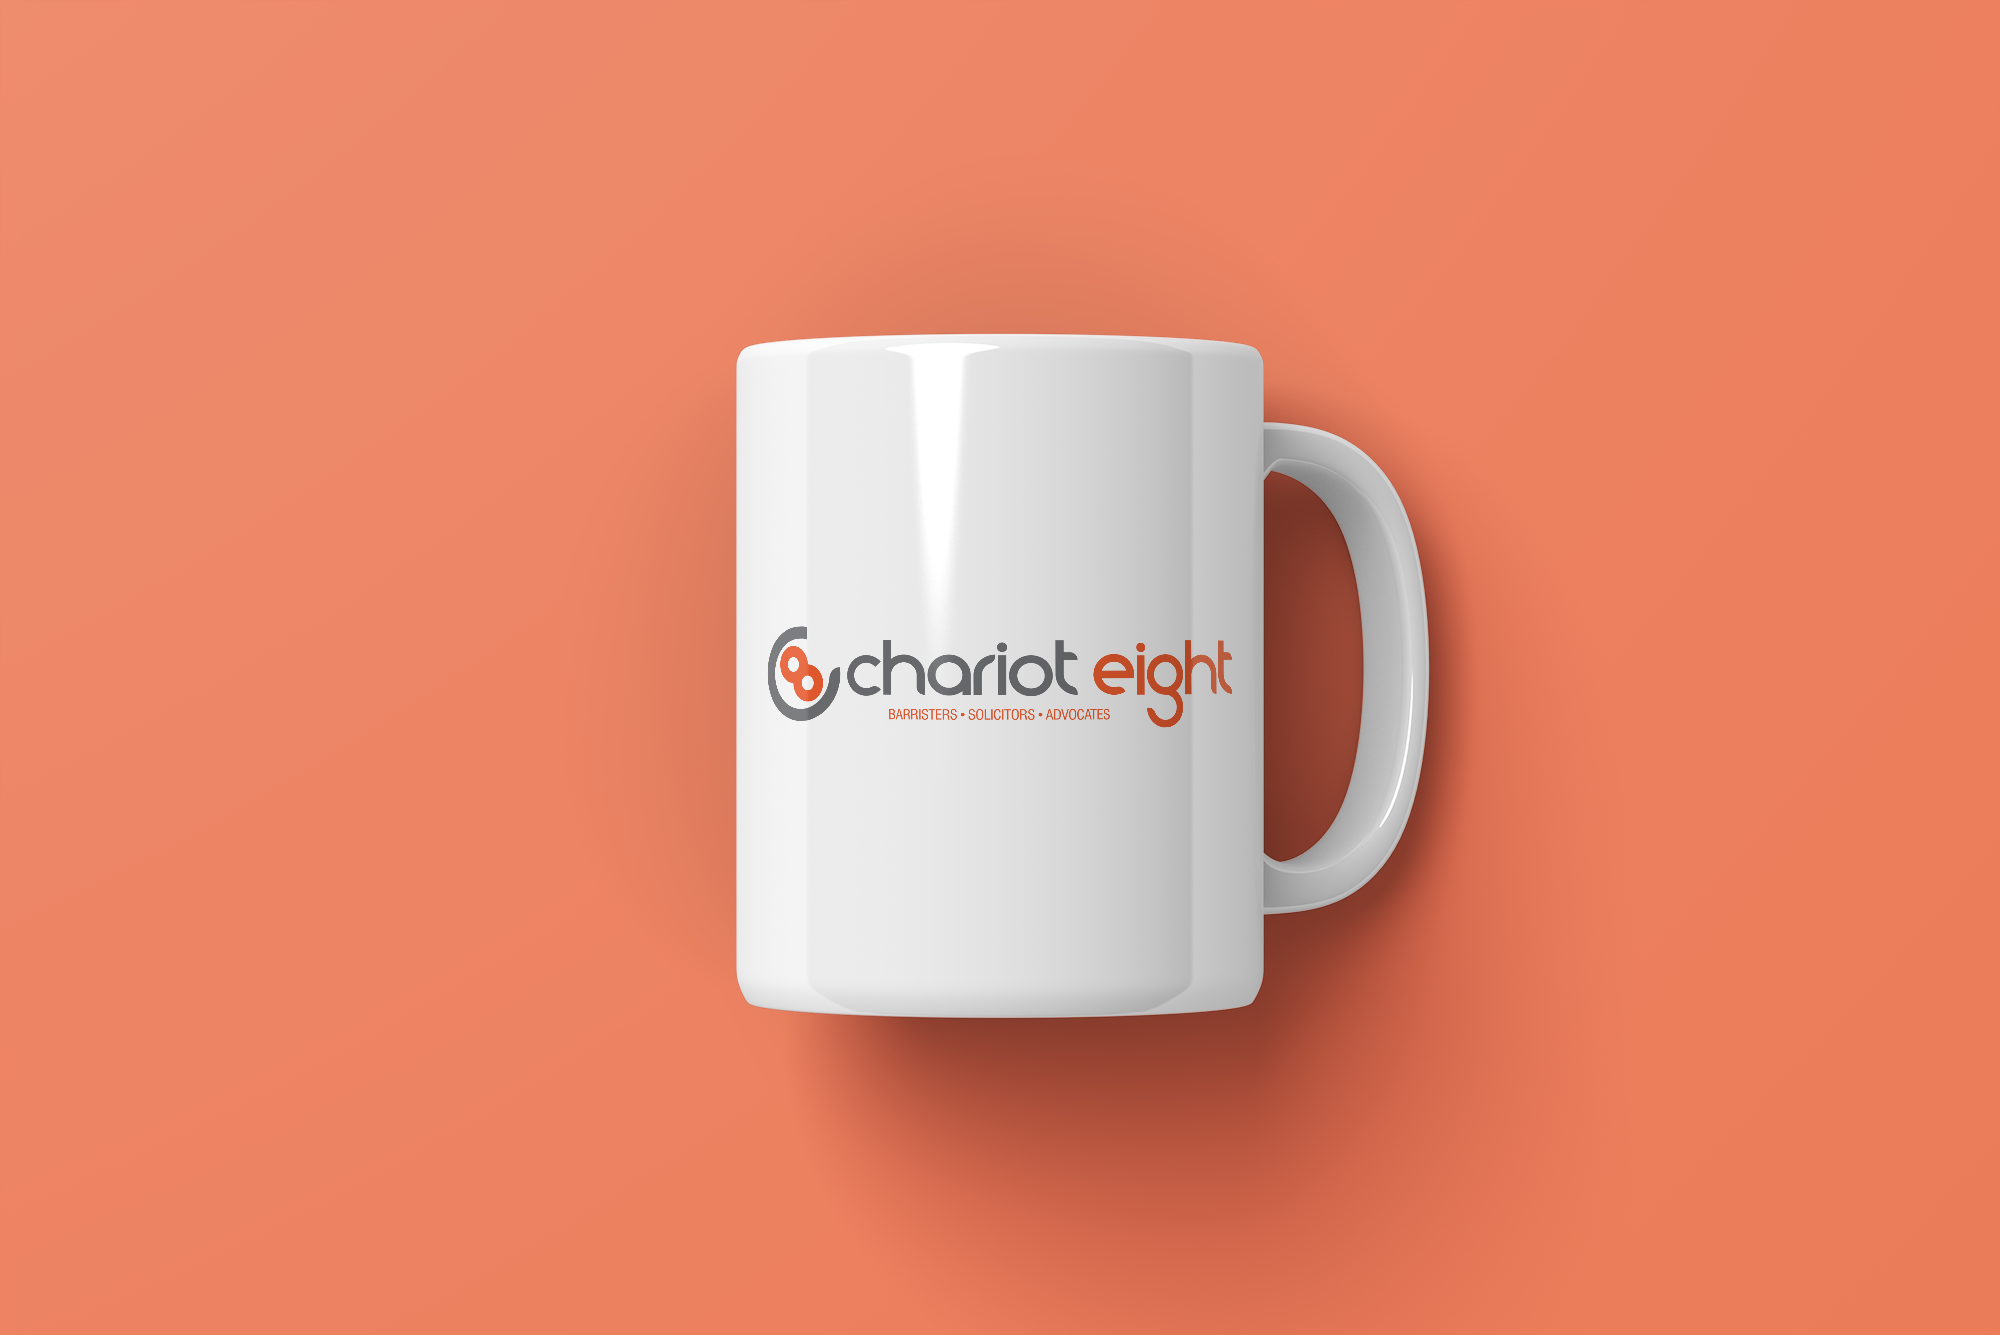 Tbuoy Designs - Chariot Eight